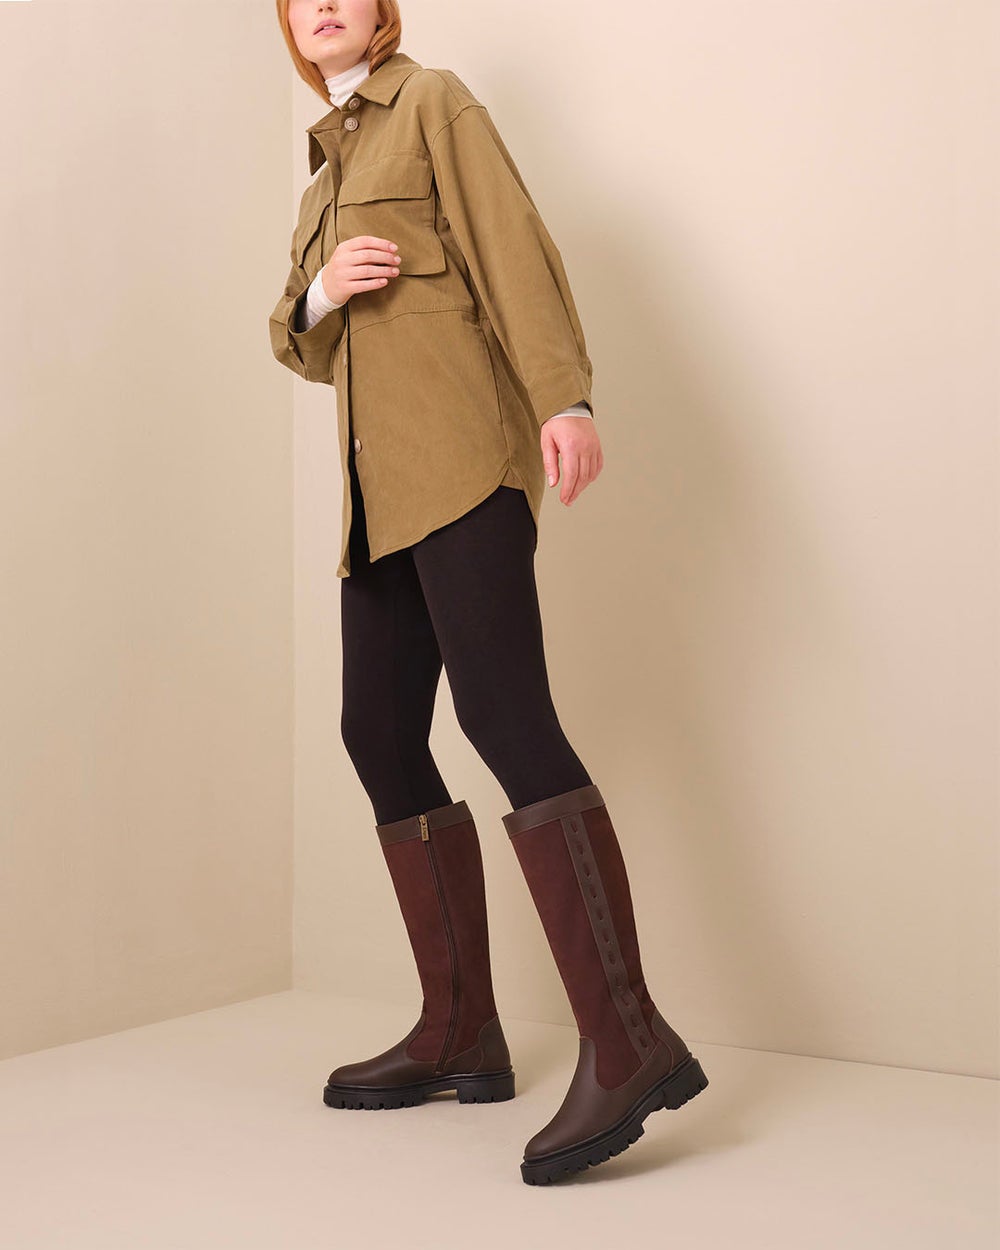 model wearing the brown boots